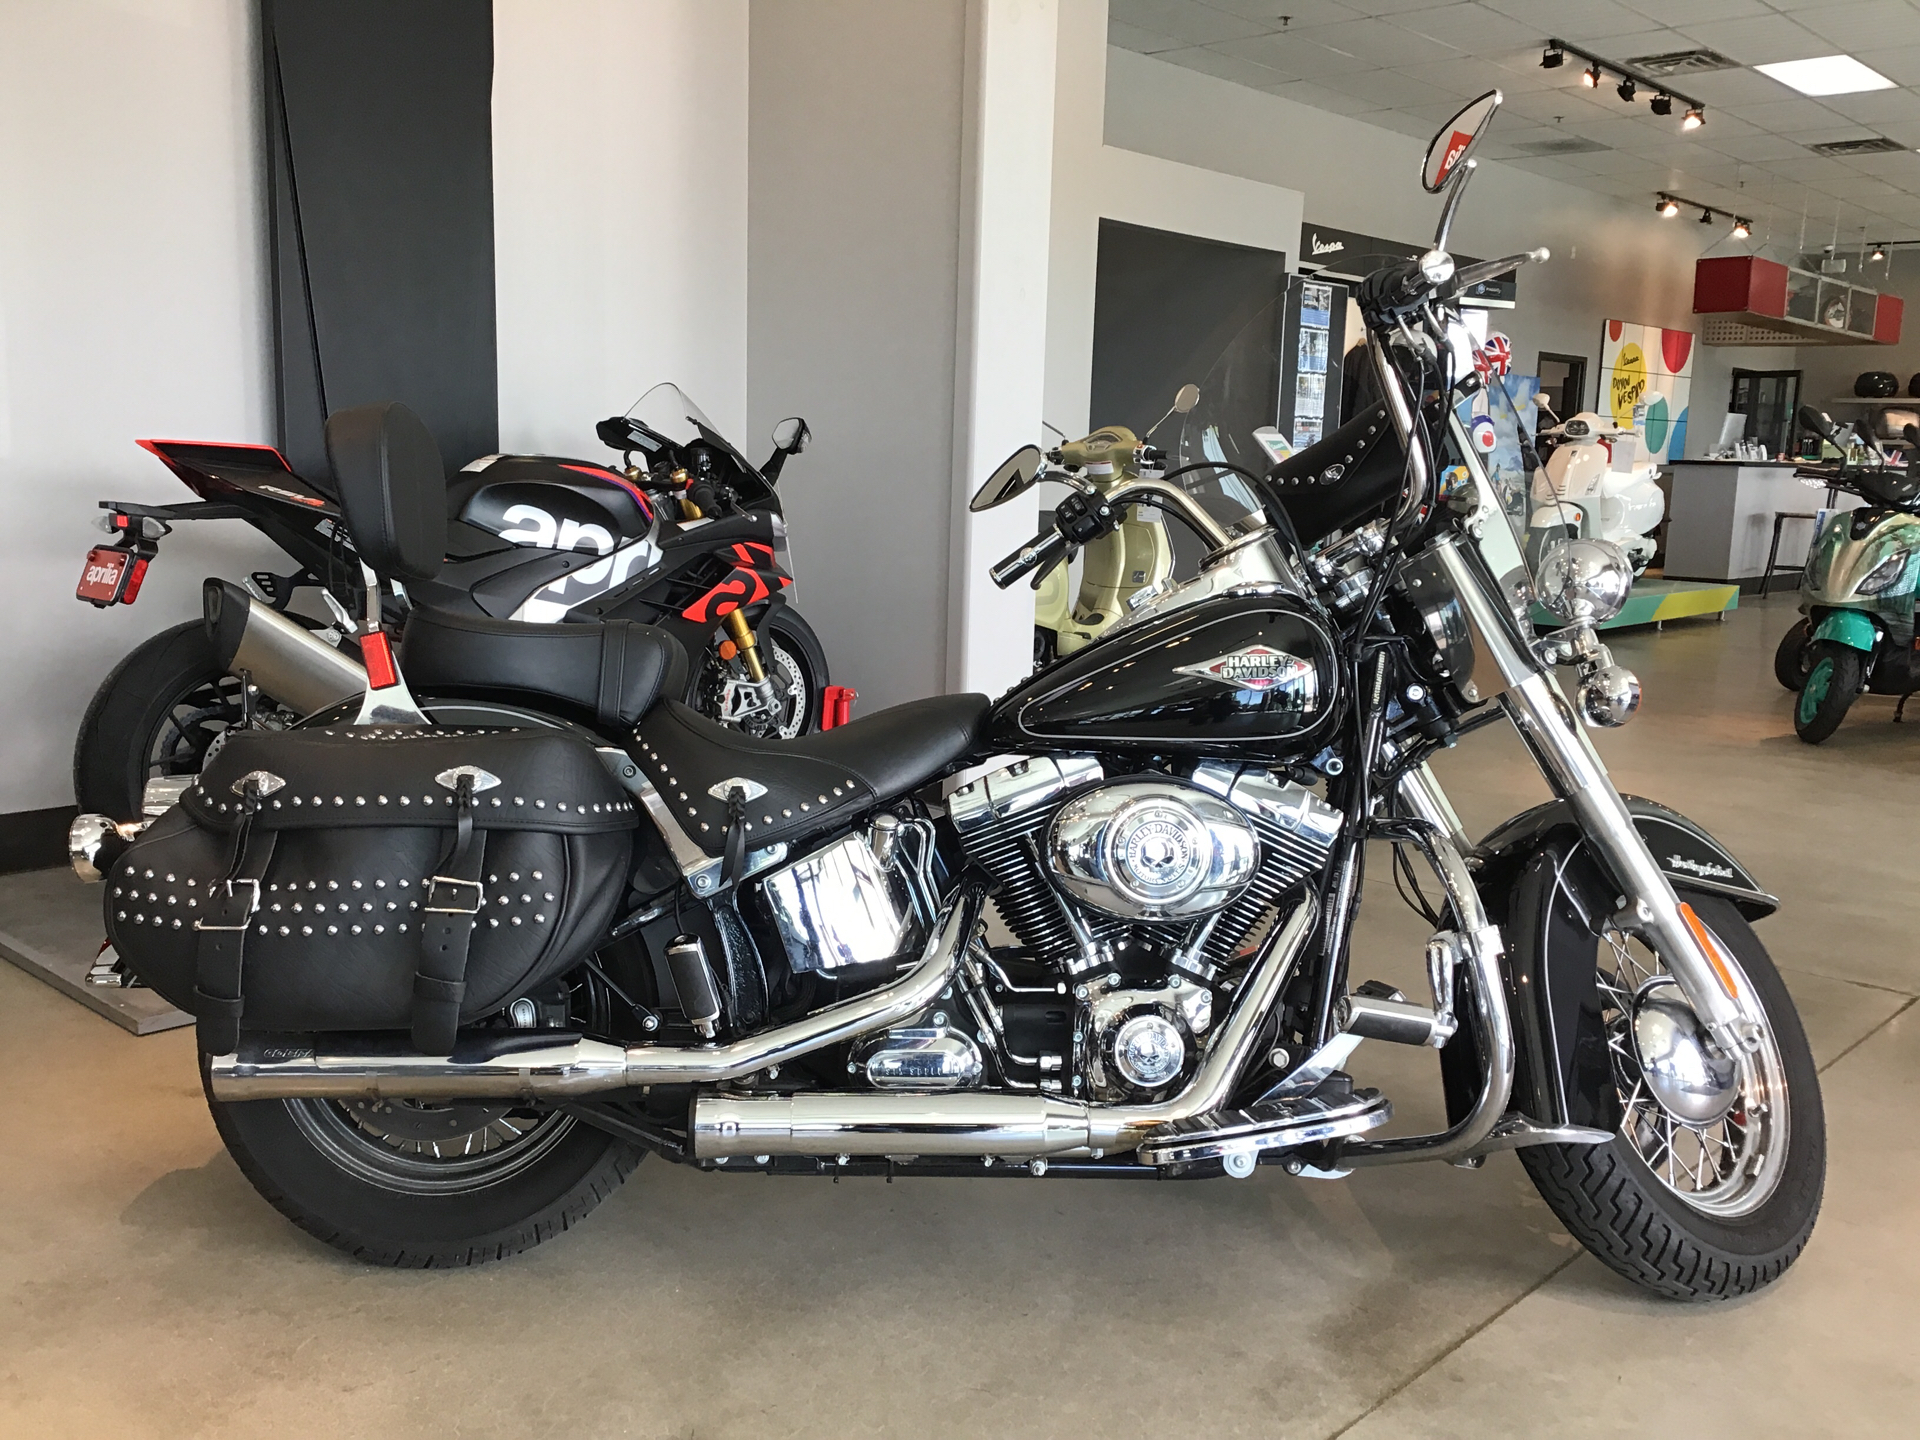 2015 Harley-Davidson Heritage Softail® Classic in West Chester, Pennsylvania - Photo 3